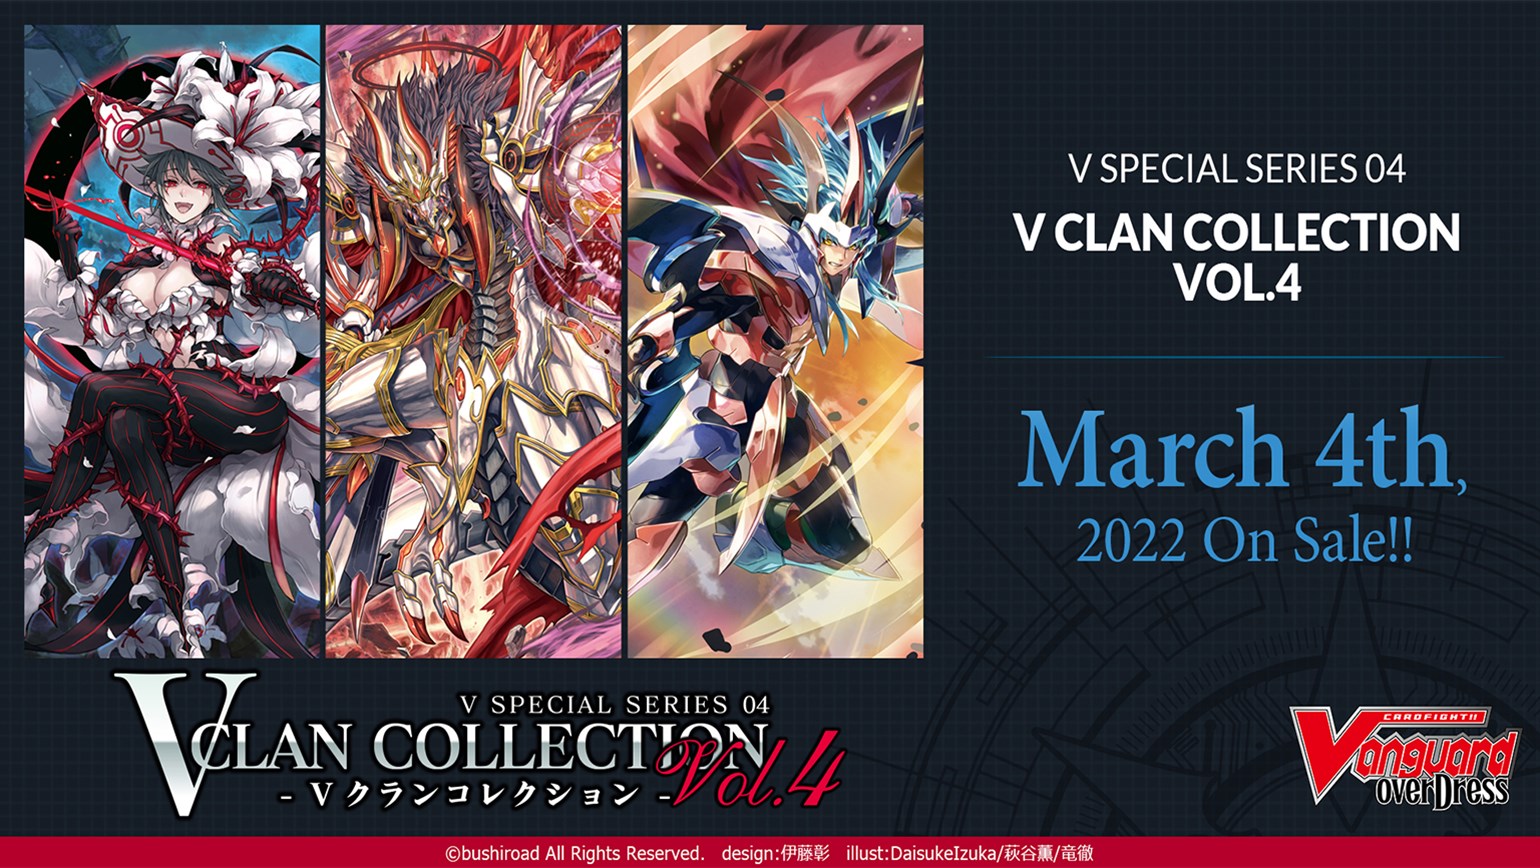 New English Edition overDress V Special Series 04: V Clan Collection Vol.4, Coming to Stores on March 4th!